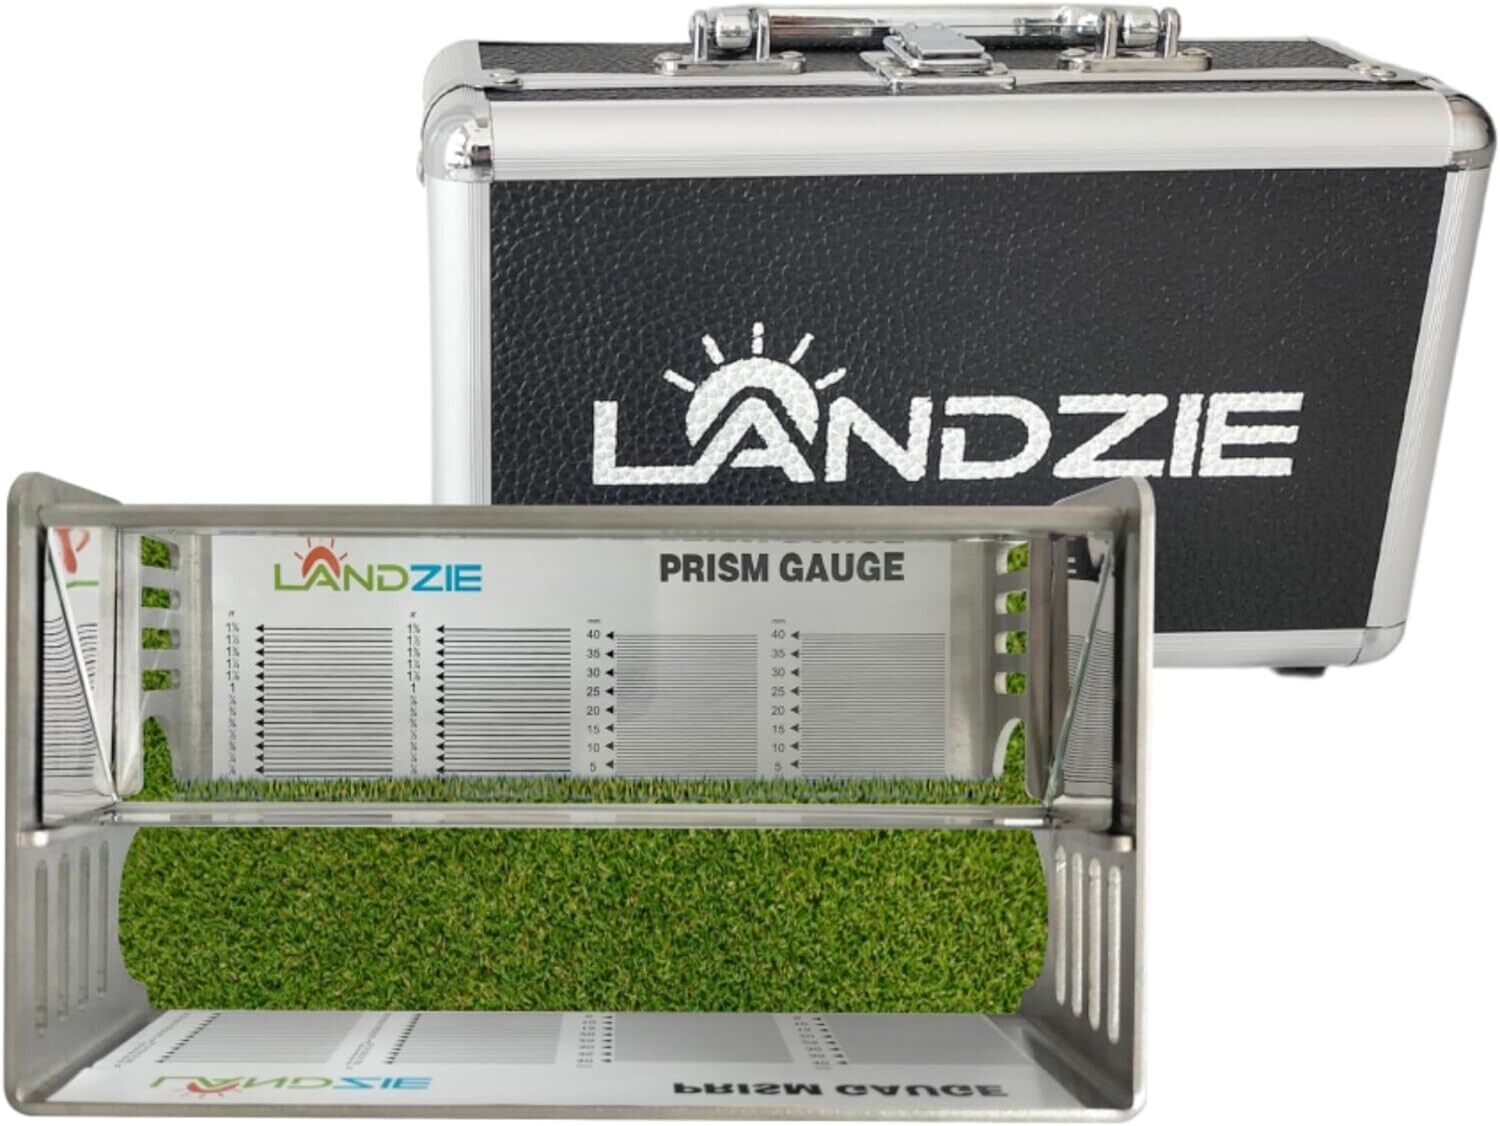 Landzie Prism Grass Height Gauge Easily Measure The Length of Lawn up to 1 5/8in